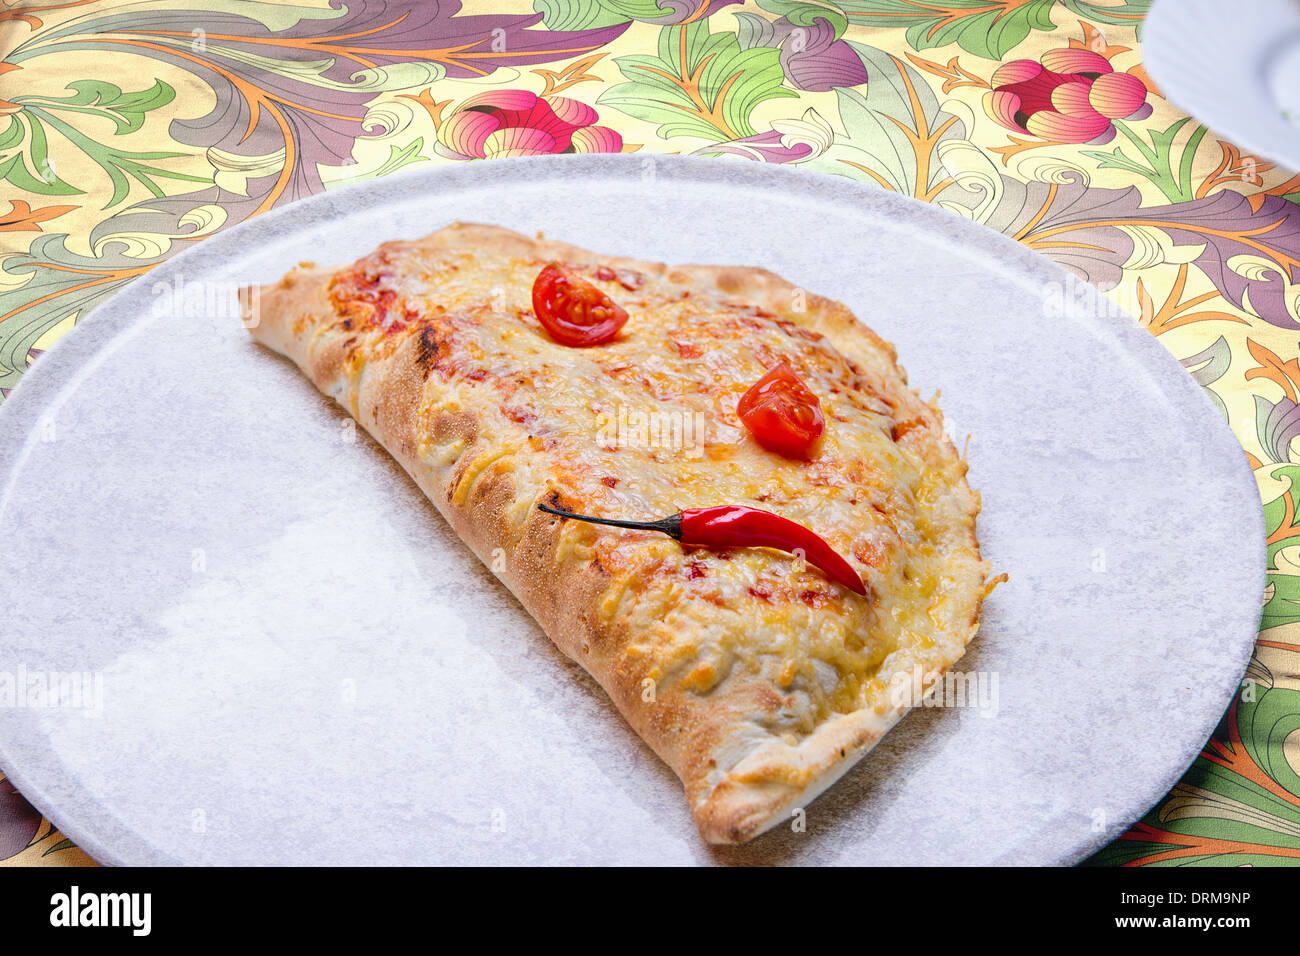 close up shot of Pizza calzone on the plate Stock Photo